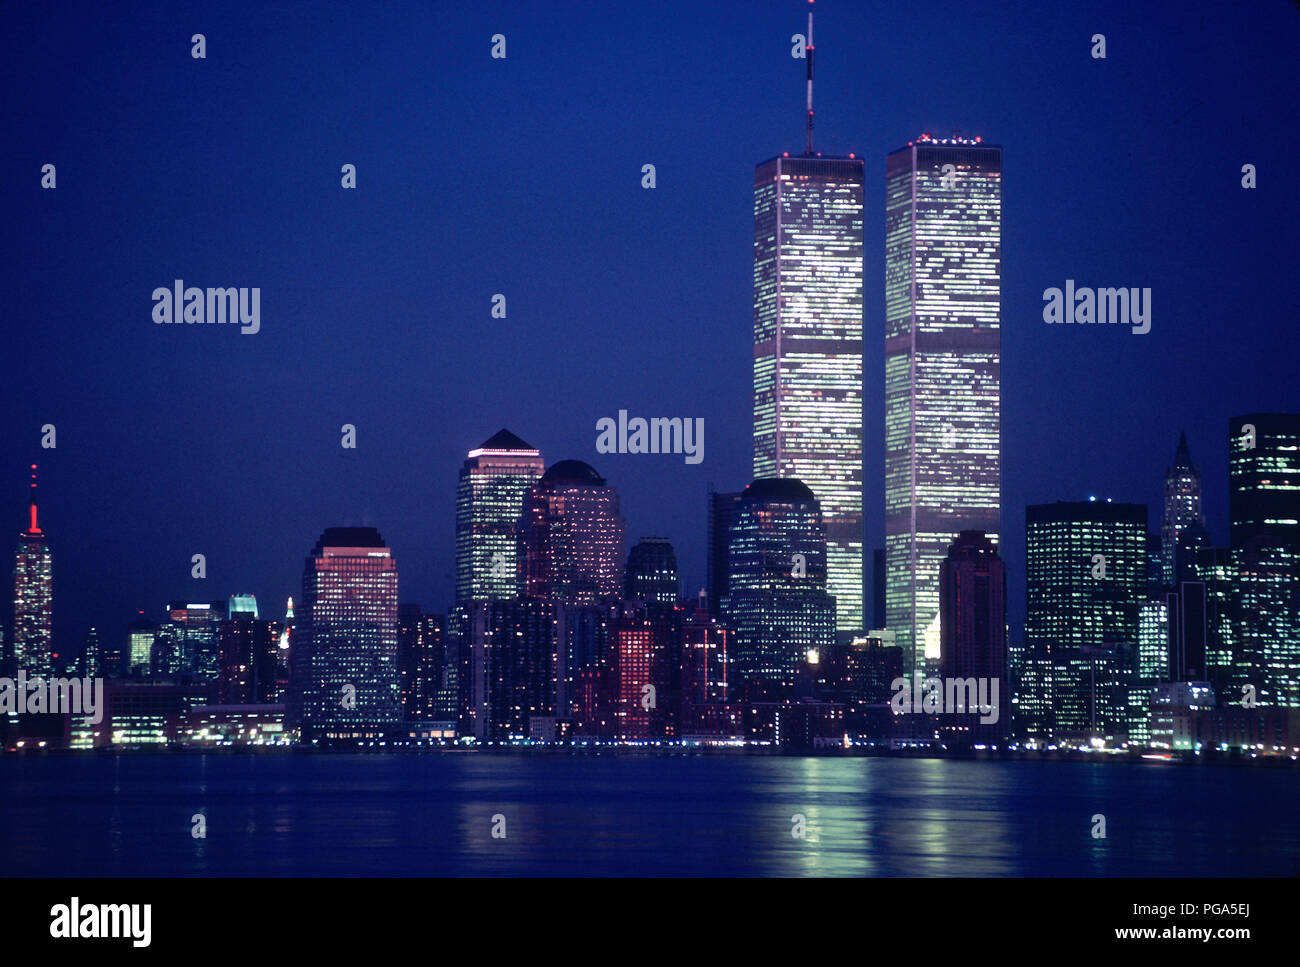 Vintage 1988 View of Lower Manhattan Skyline with Twin Towers of World Trade Center, NYC, USA Stock Photo